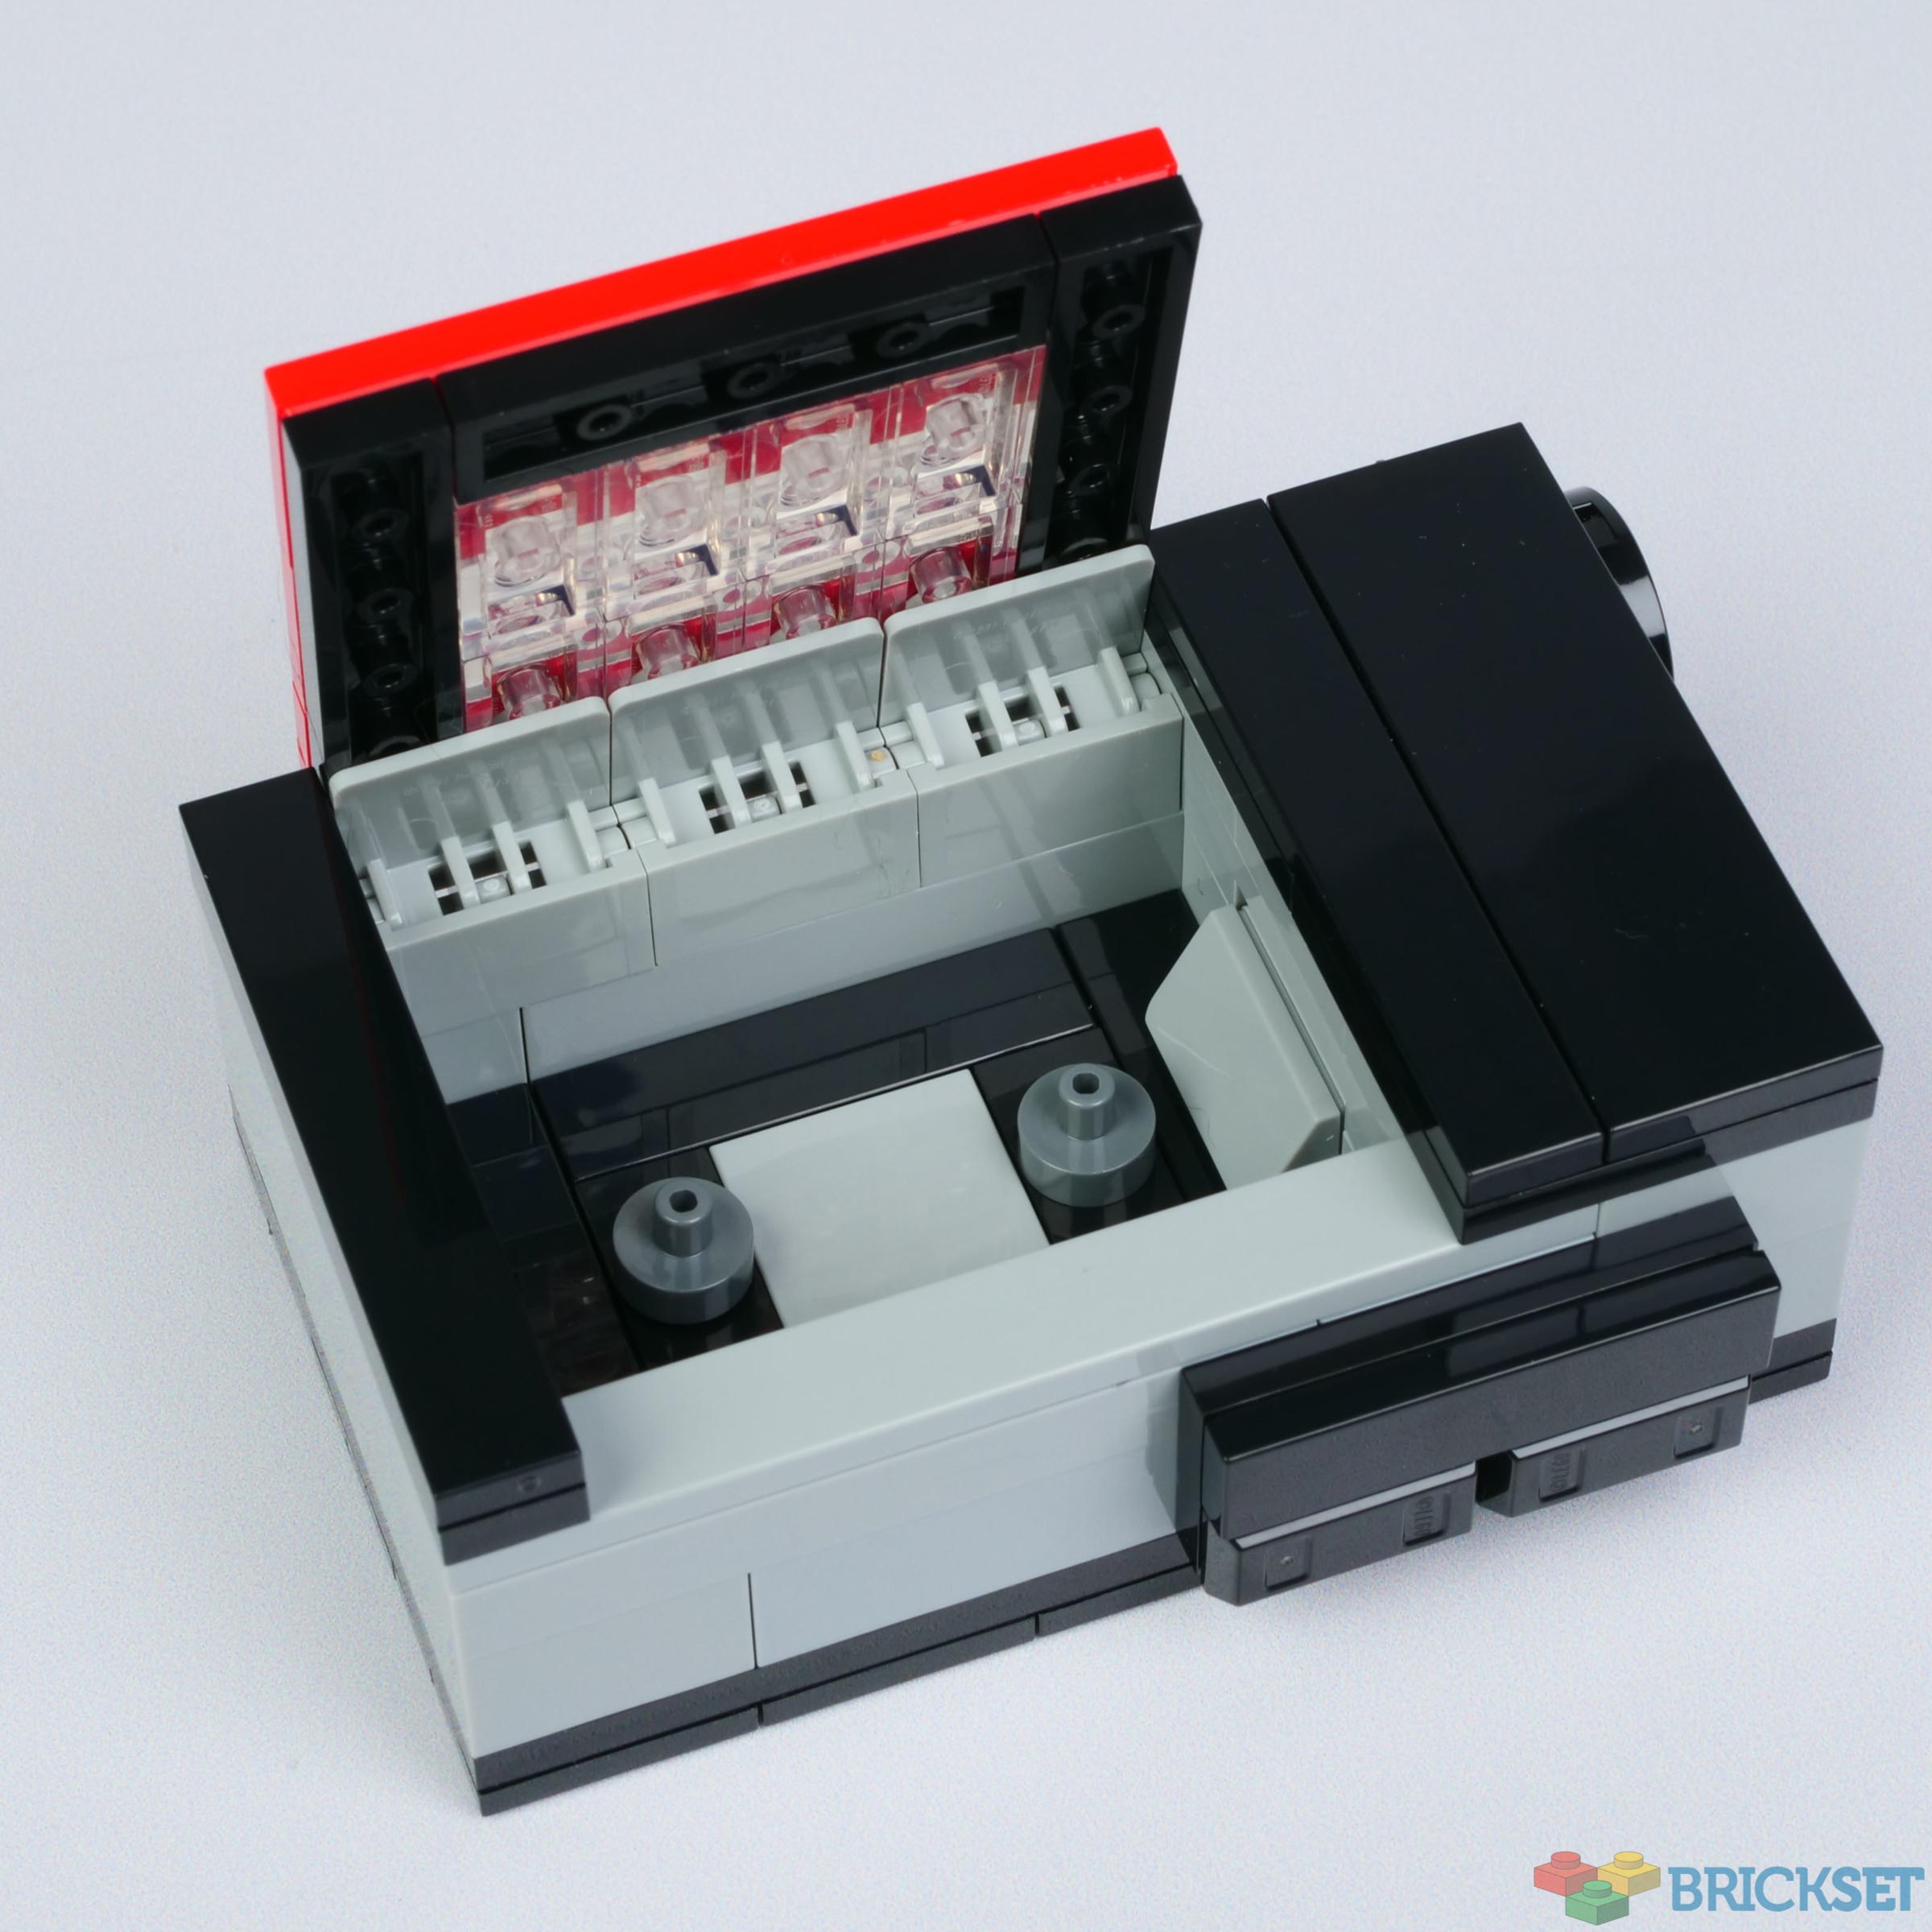 LEGO 6471611 Portable Cassette Player: new Gift with Purchase or VIP  Reward? - BrickTastic